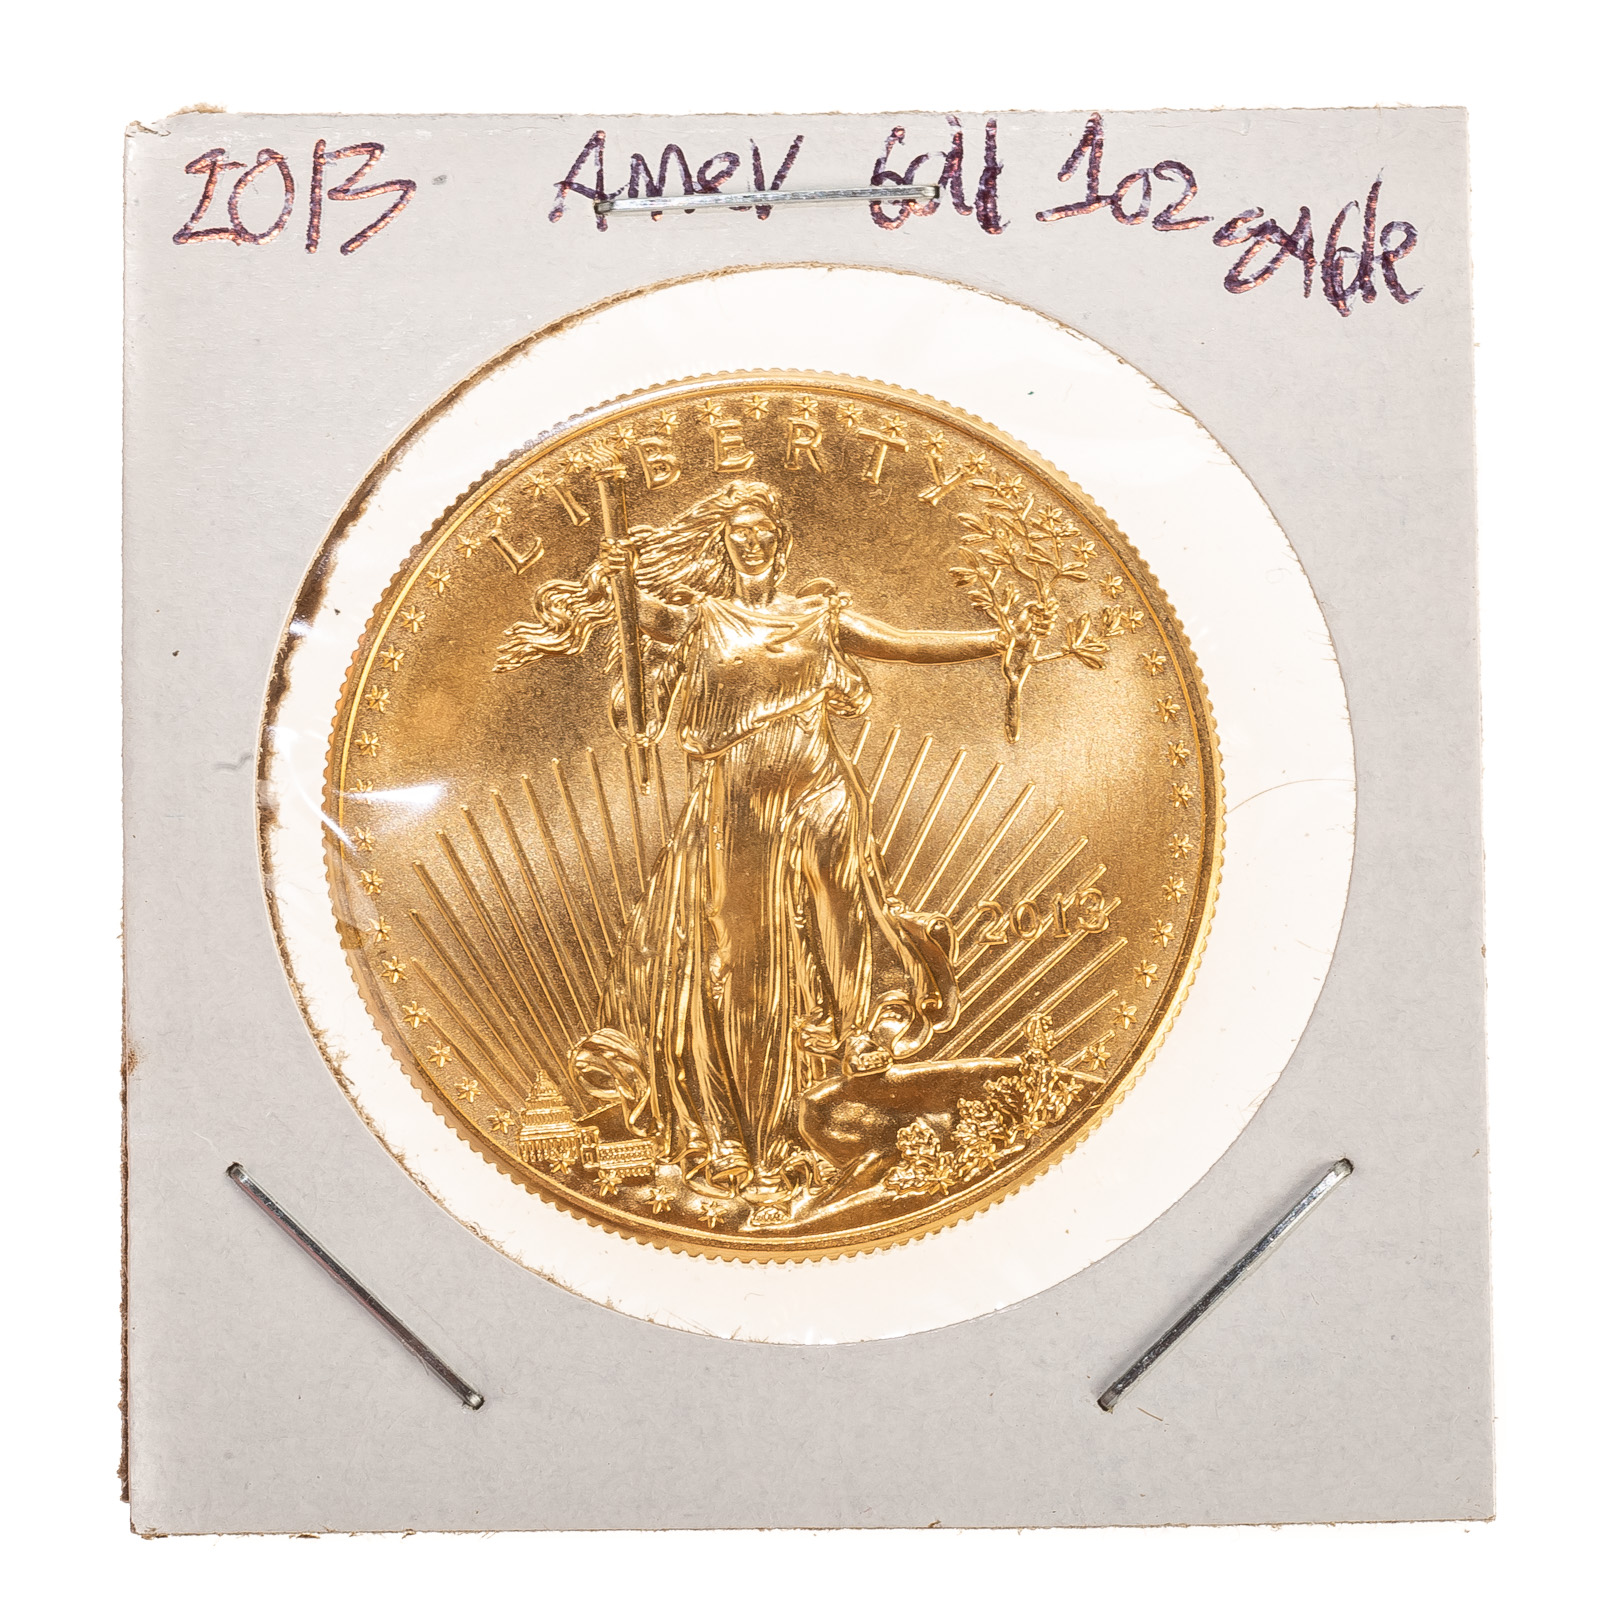 2013 1 OUNCE 50 AMERICAN GOLD 287a05